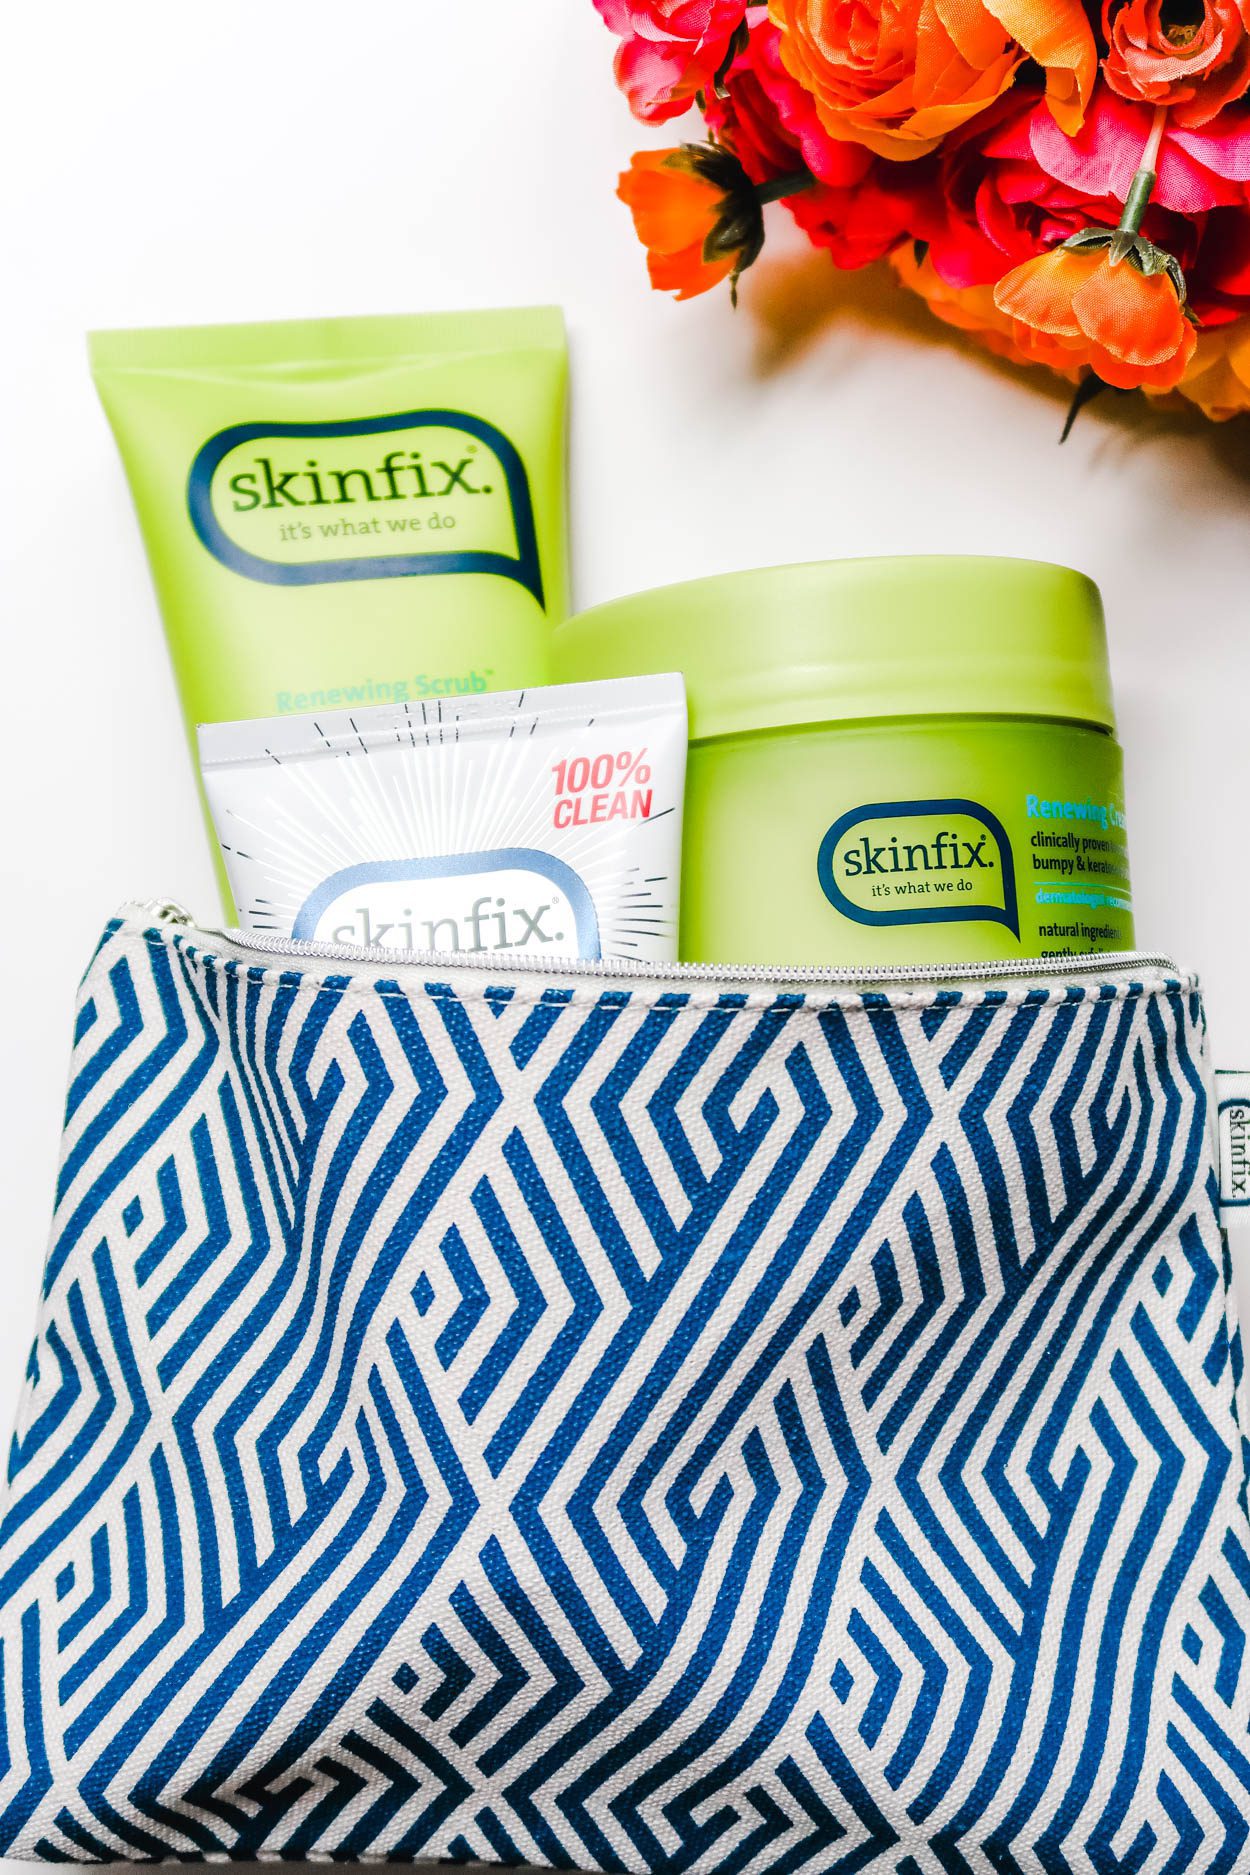 Skinfix Exfoliate and Hydrate 3-Piece Kit is available on QVC. This 2-piece kit (plus bag) will help dry, irritated, rough skin. It features an exfoliant, moisturizer and renewing cream. #skincare #qvc #qvcbeauty #dryskin